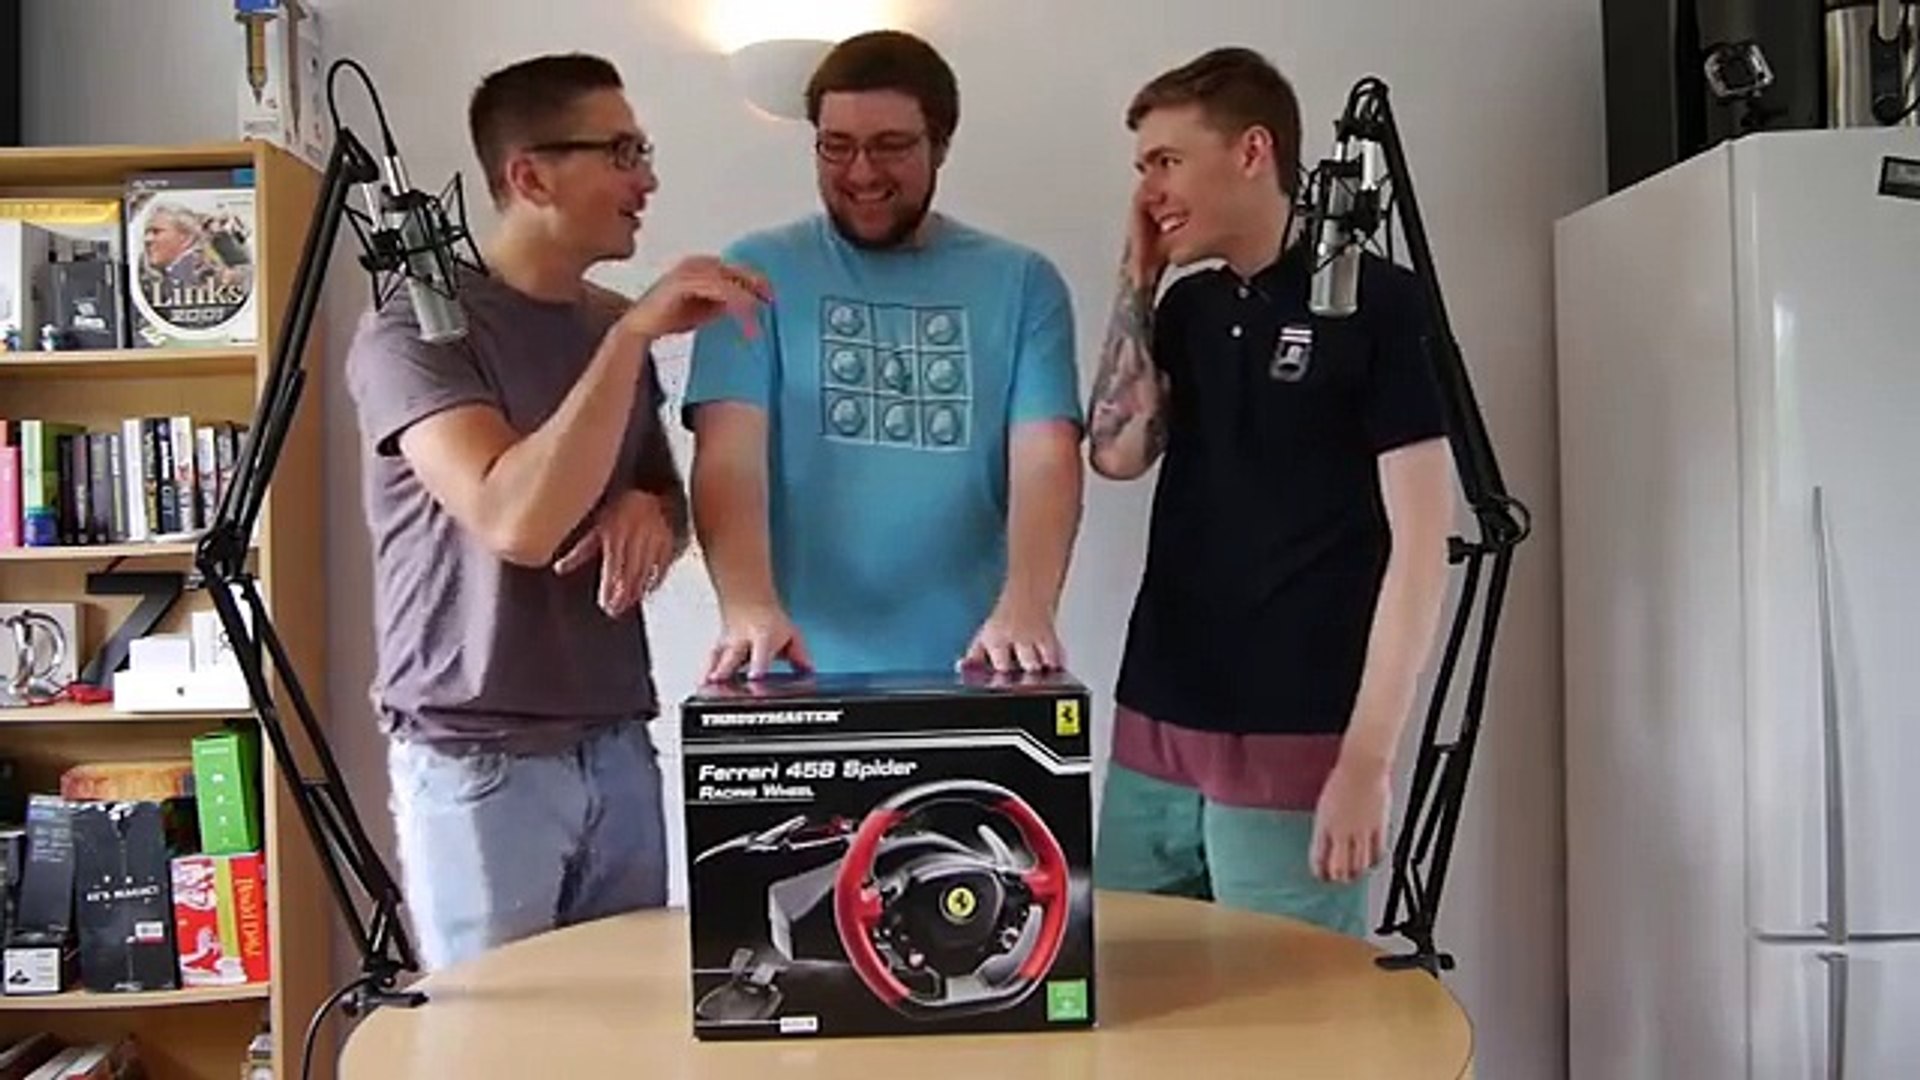 Thrustmaster Ferrari 458 Spider Racing Wheel Unboxing Works With Project Cars On Xbox One